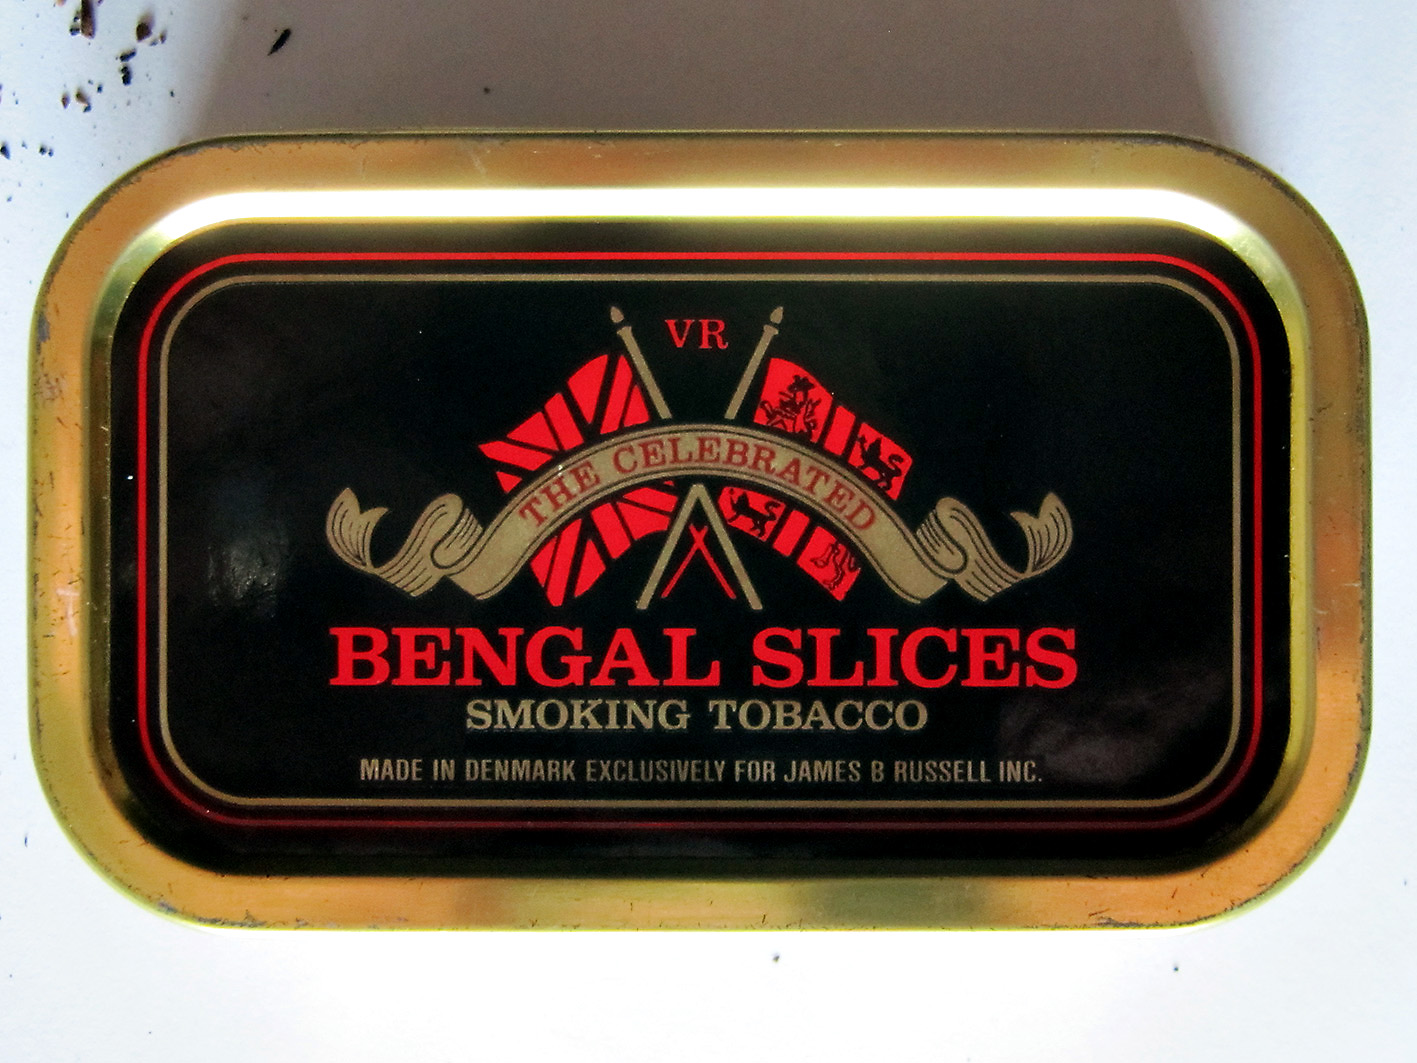 A&C Petersen made Bengal Slices